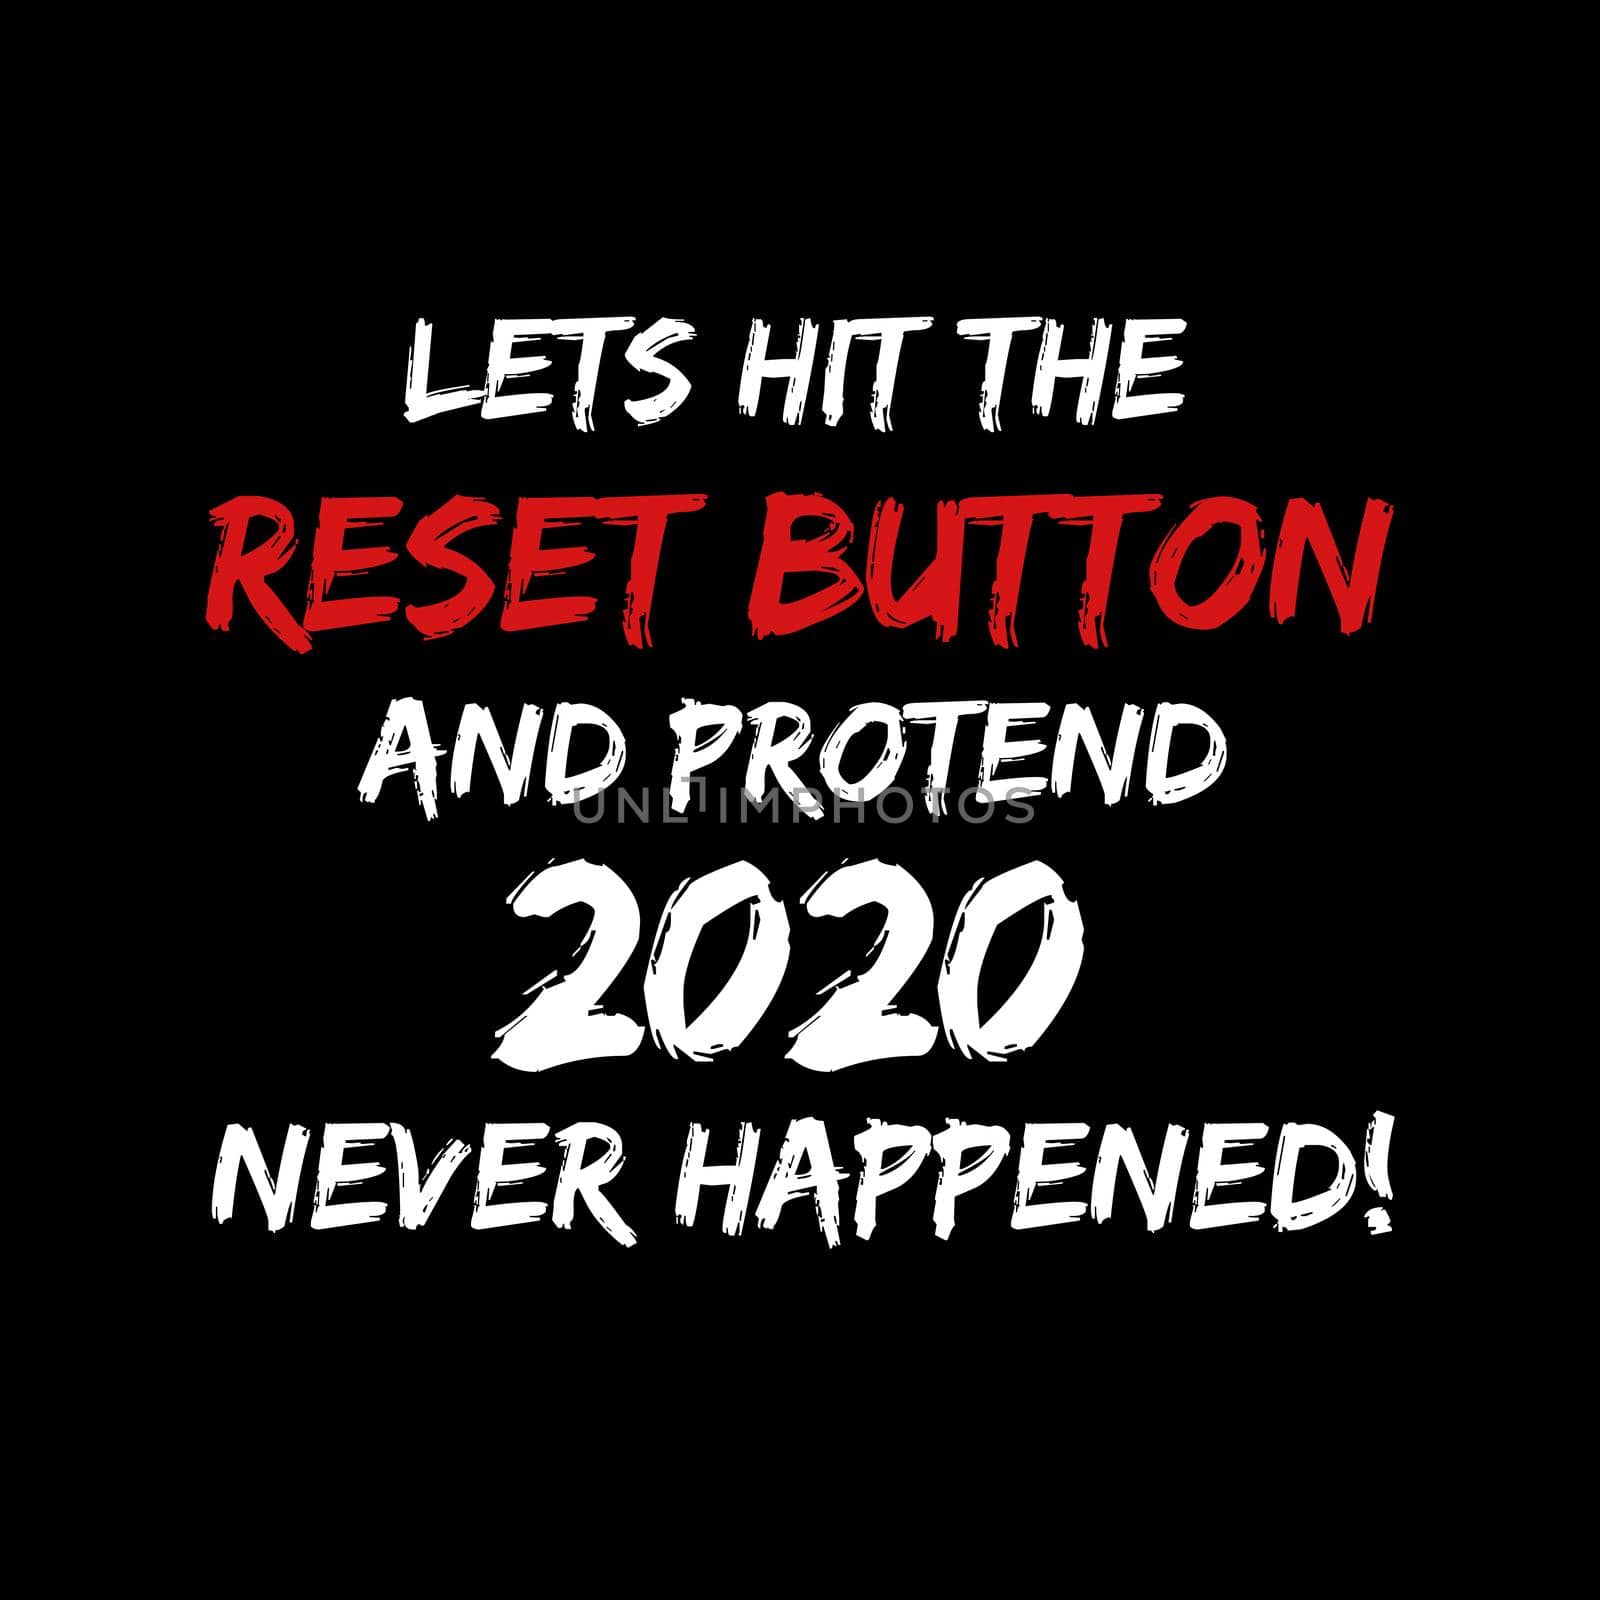 Lets hit the 2020 reset button by Bigalbaloo